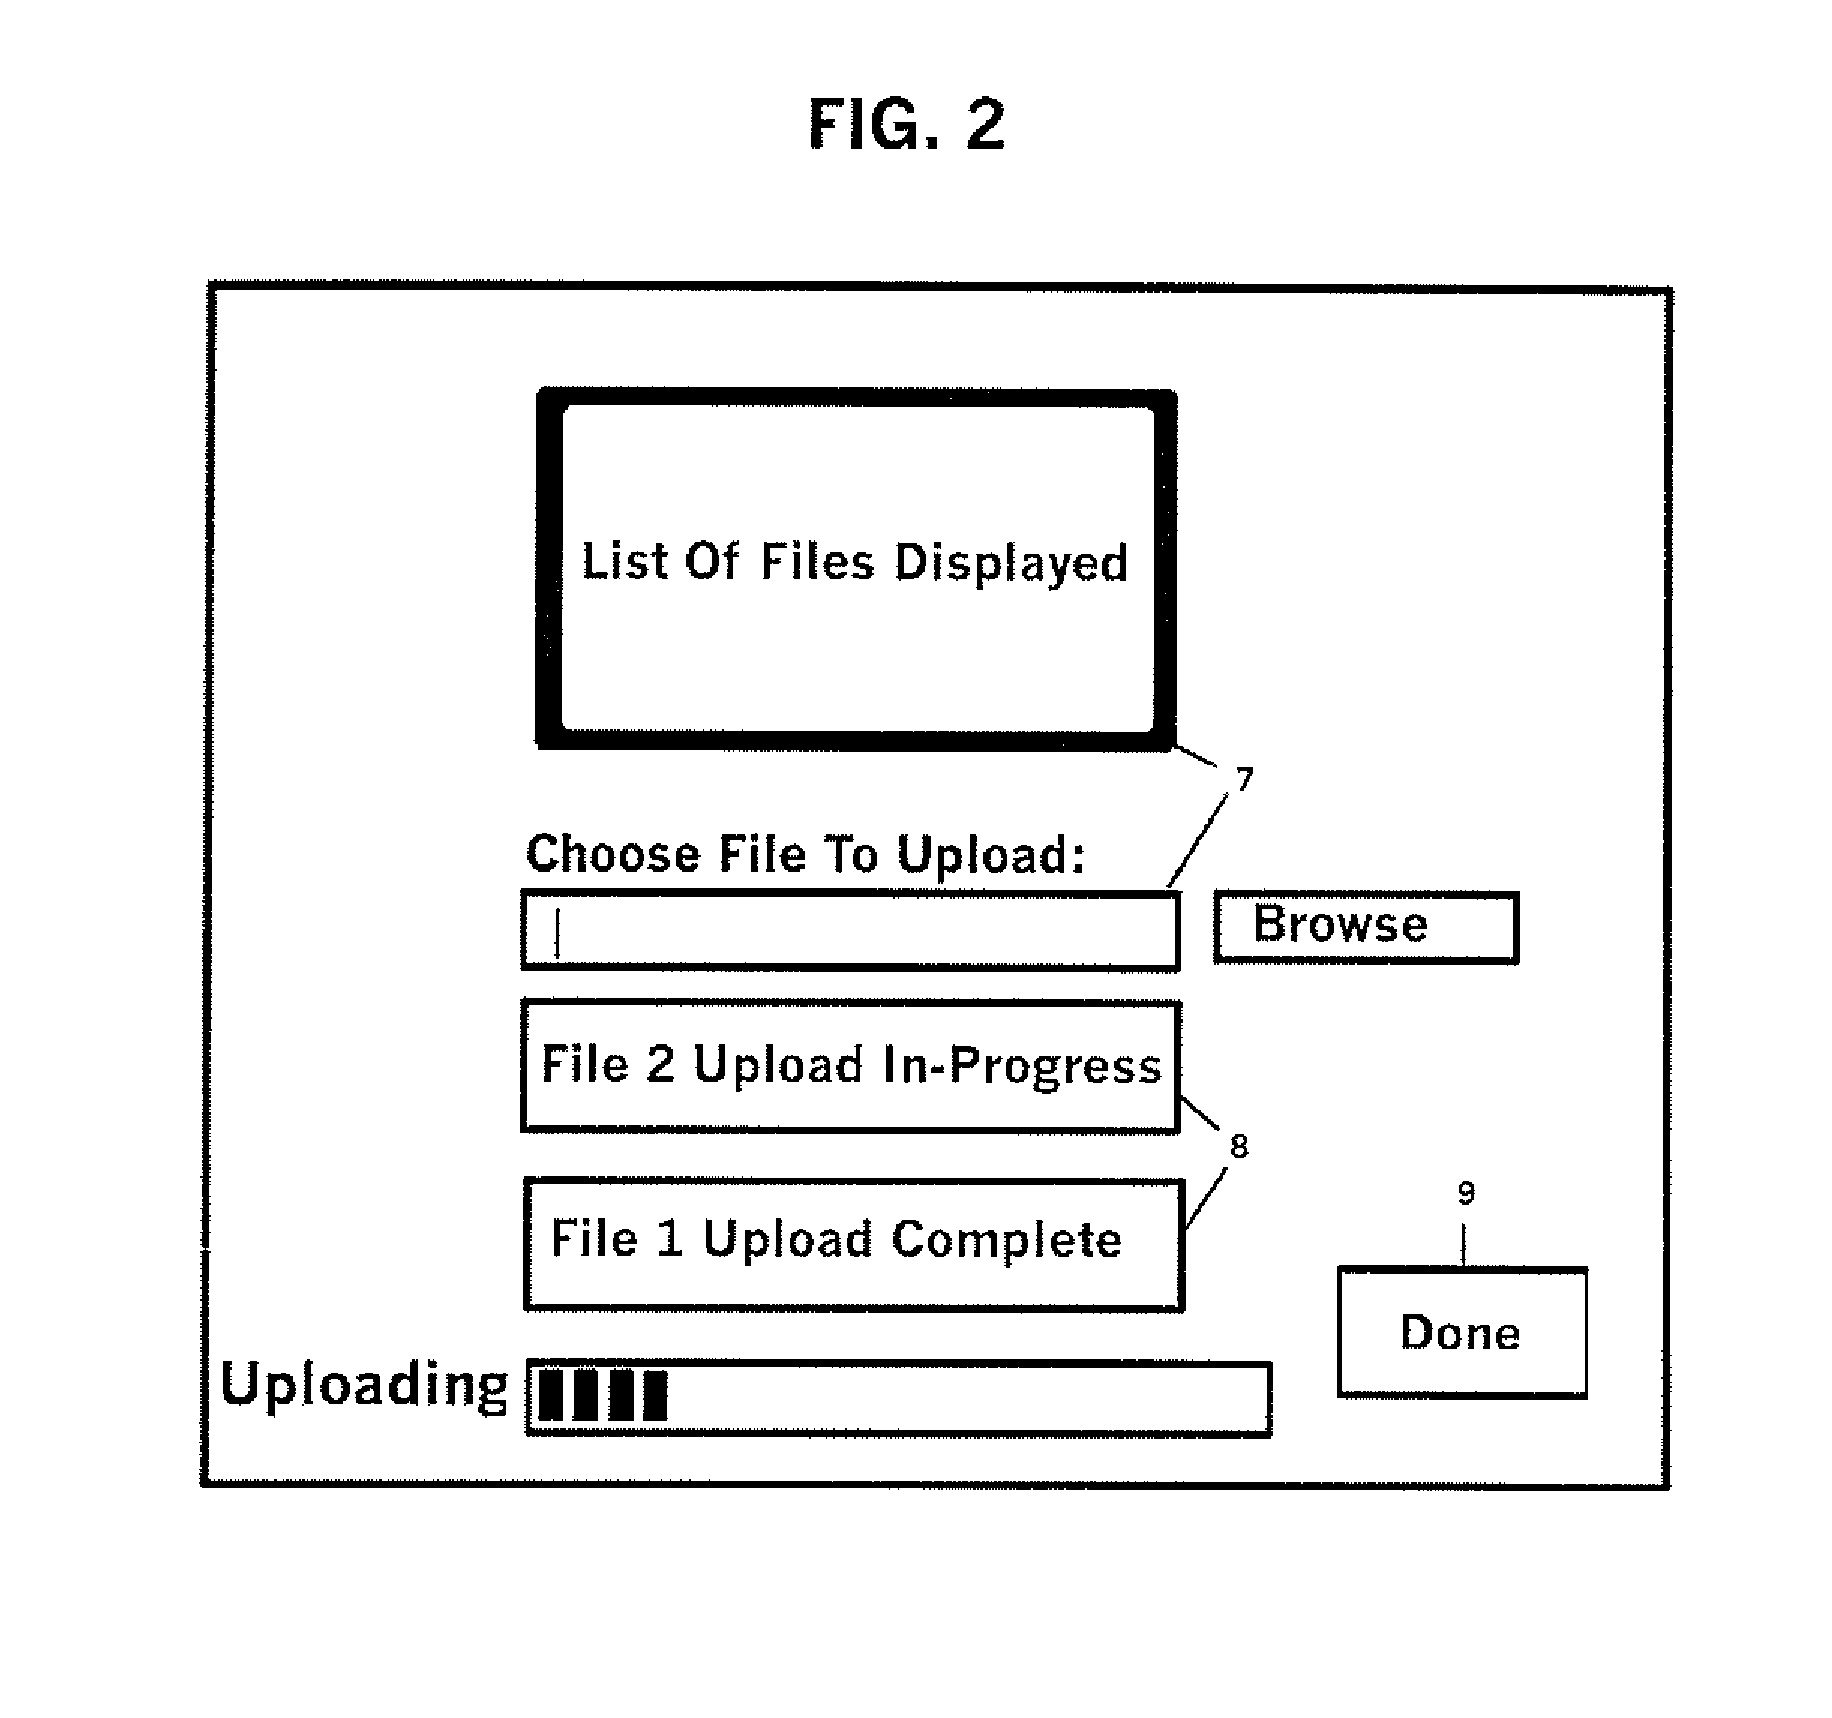 Method And System Of Distributing, Advertising, And Fundraising